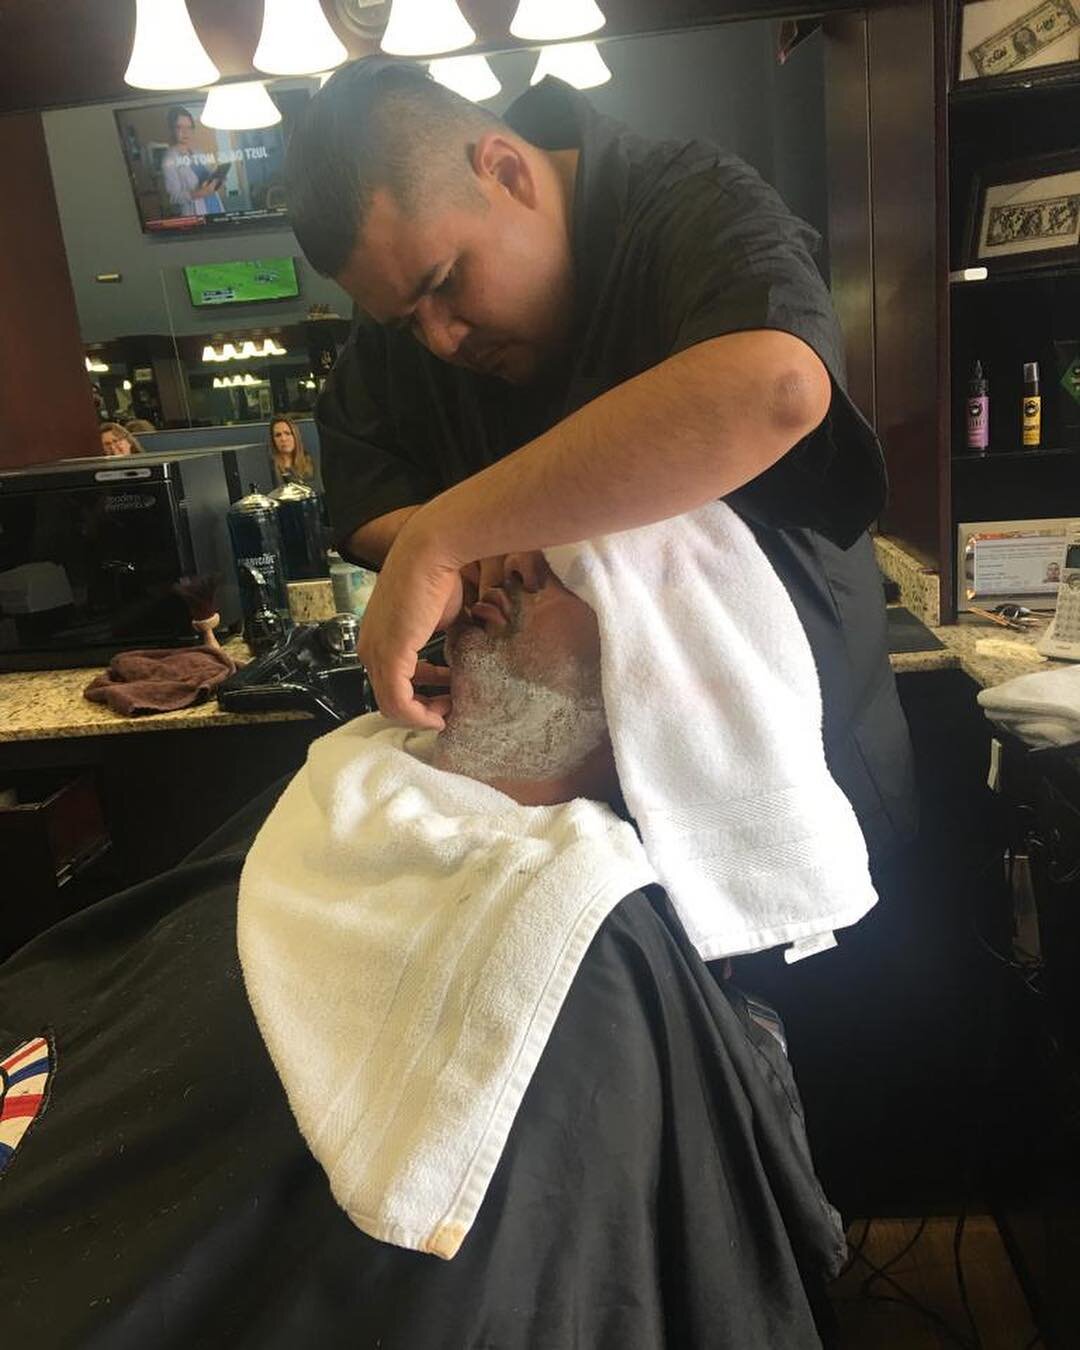 If you are looking for a great new barbershop in Mesa, we are here for you! We have an amazing family friendly barbershop waiting to help you with haircut needs. We are now offering $3 off haircuts any time for any veteran/armed forces/firefighter/po